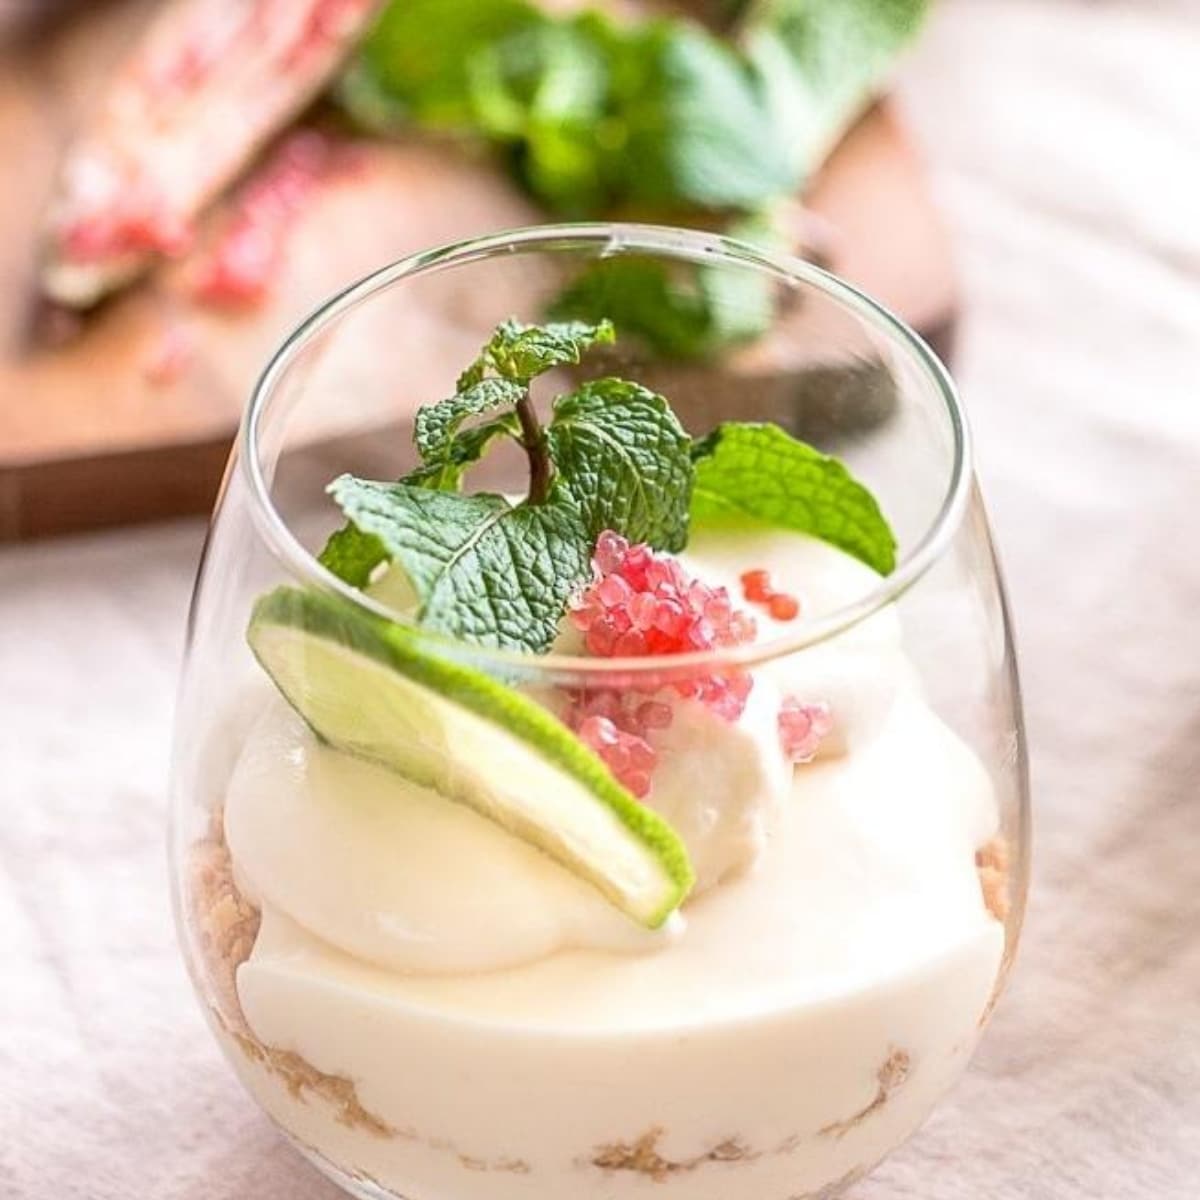 Mojito Cheesecake Parfaits with Finger Lime Caviar - Oh My Veggies